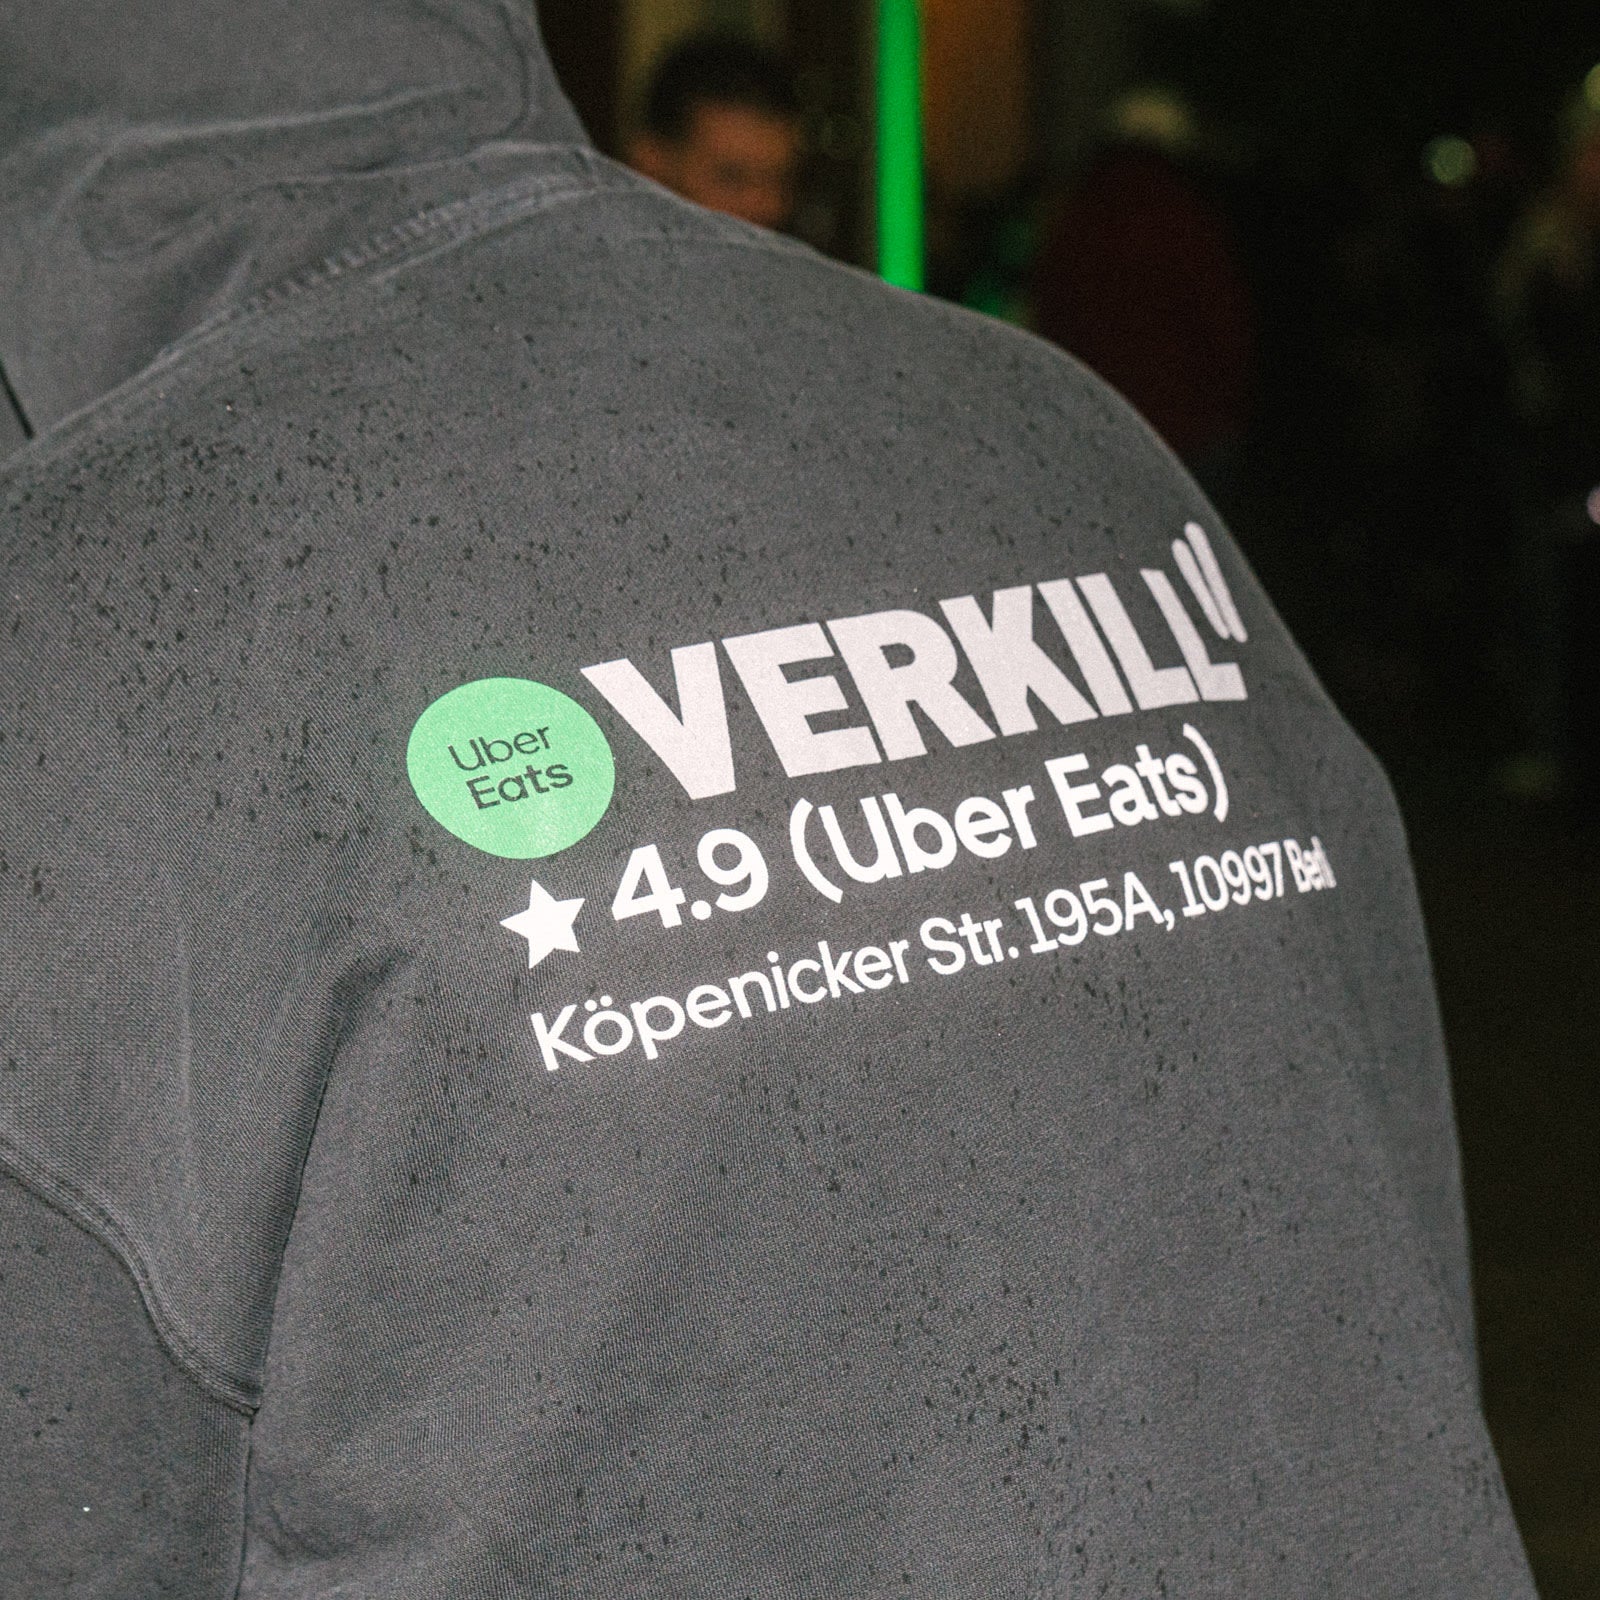 OVERKILL x UBER EATS CAPSULE COLLECTION